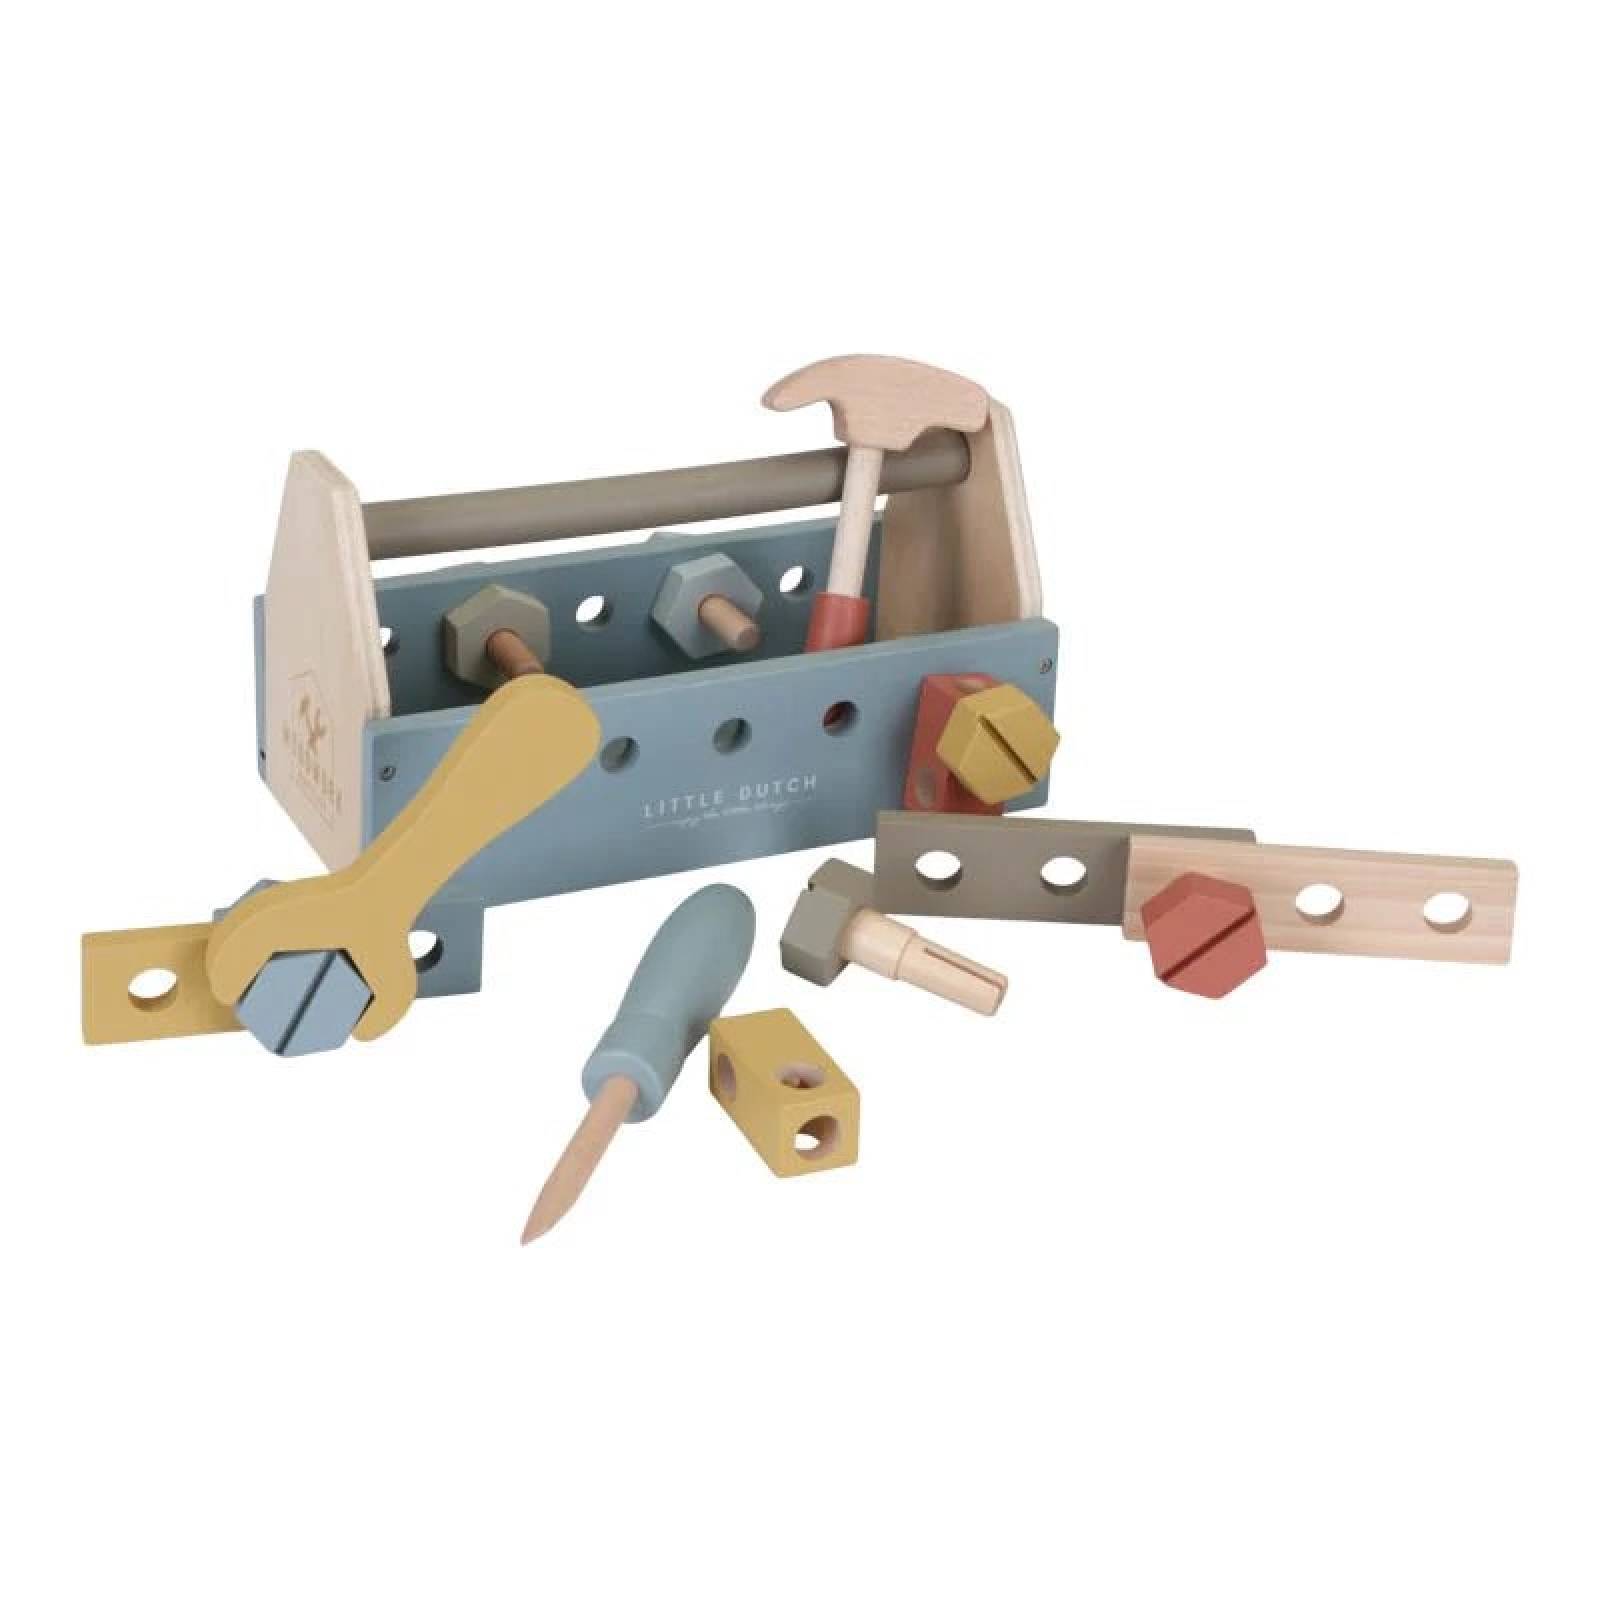 Wooden Toolbox Toy By Little Dutch 3+ thumbnails